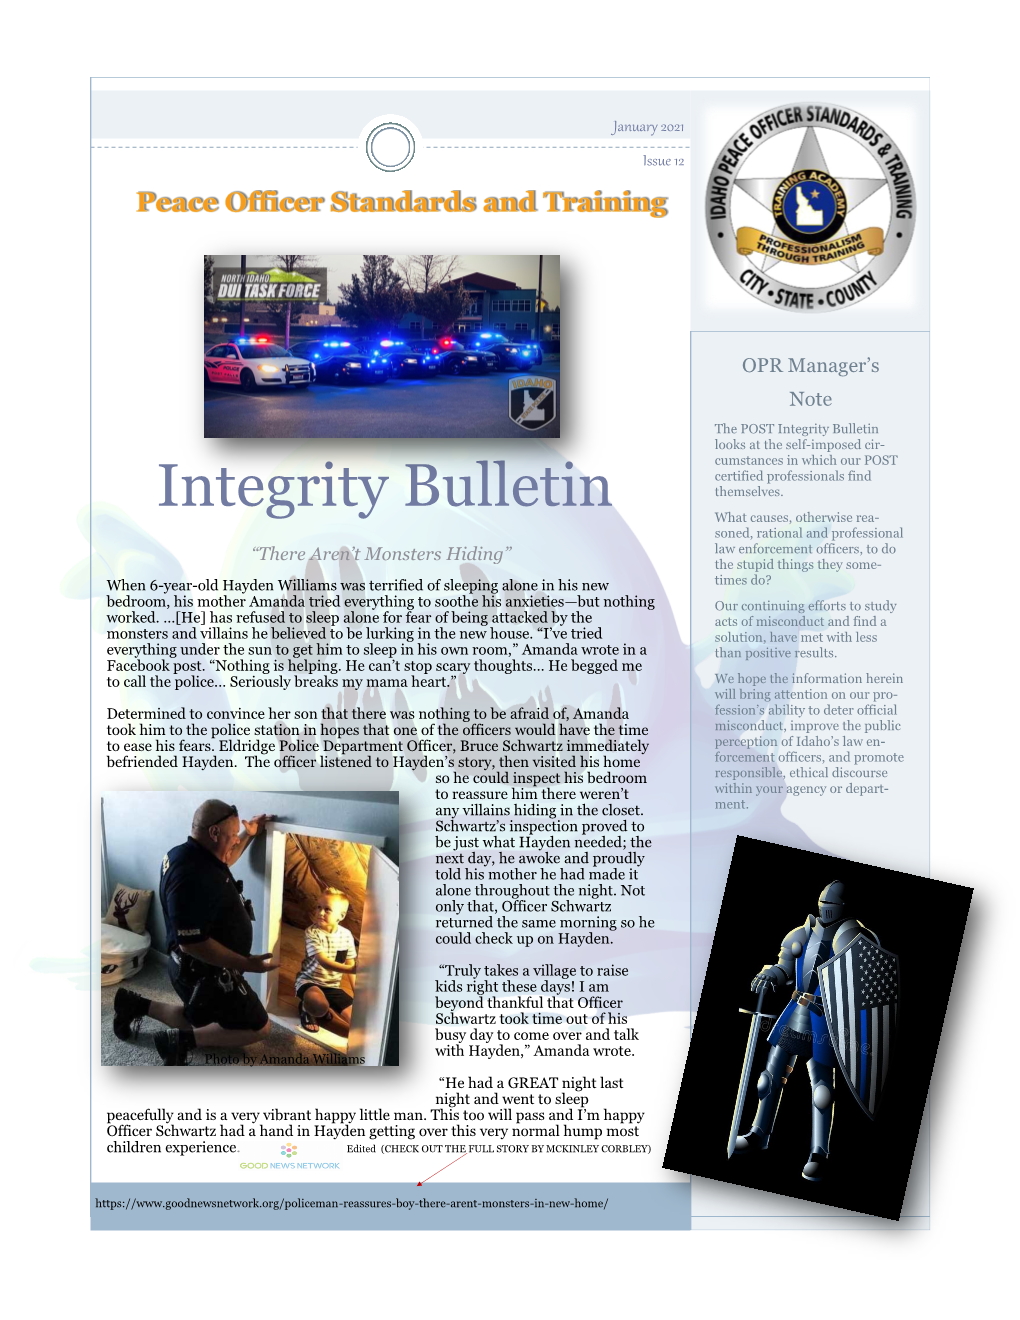 Integrity Bulletin Looks at the Self-Imposed Cir- Cumstances in Which Our POST Certified Professionals Find Integrity Bulletin Themselves